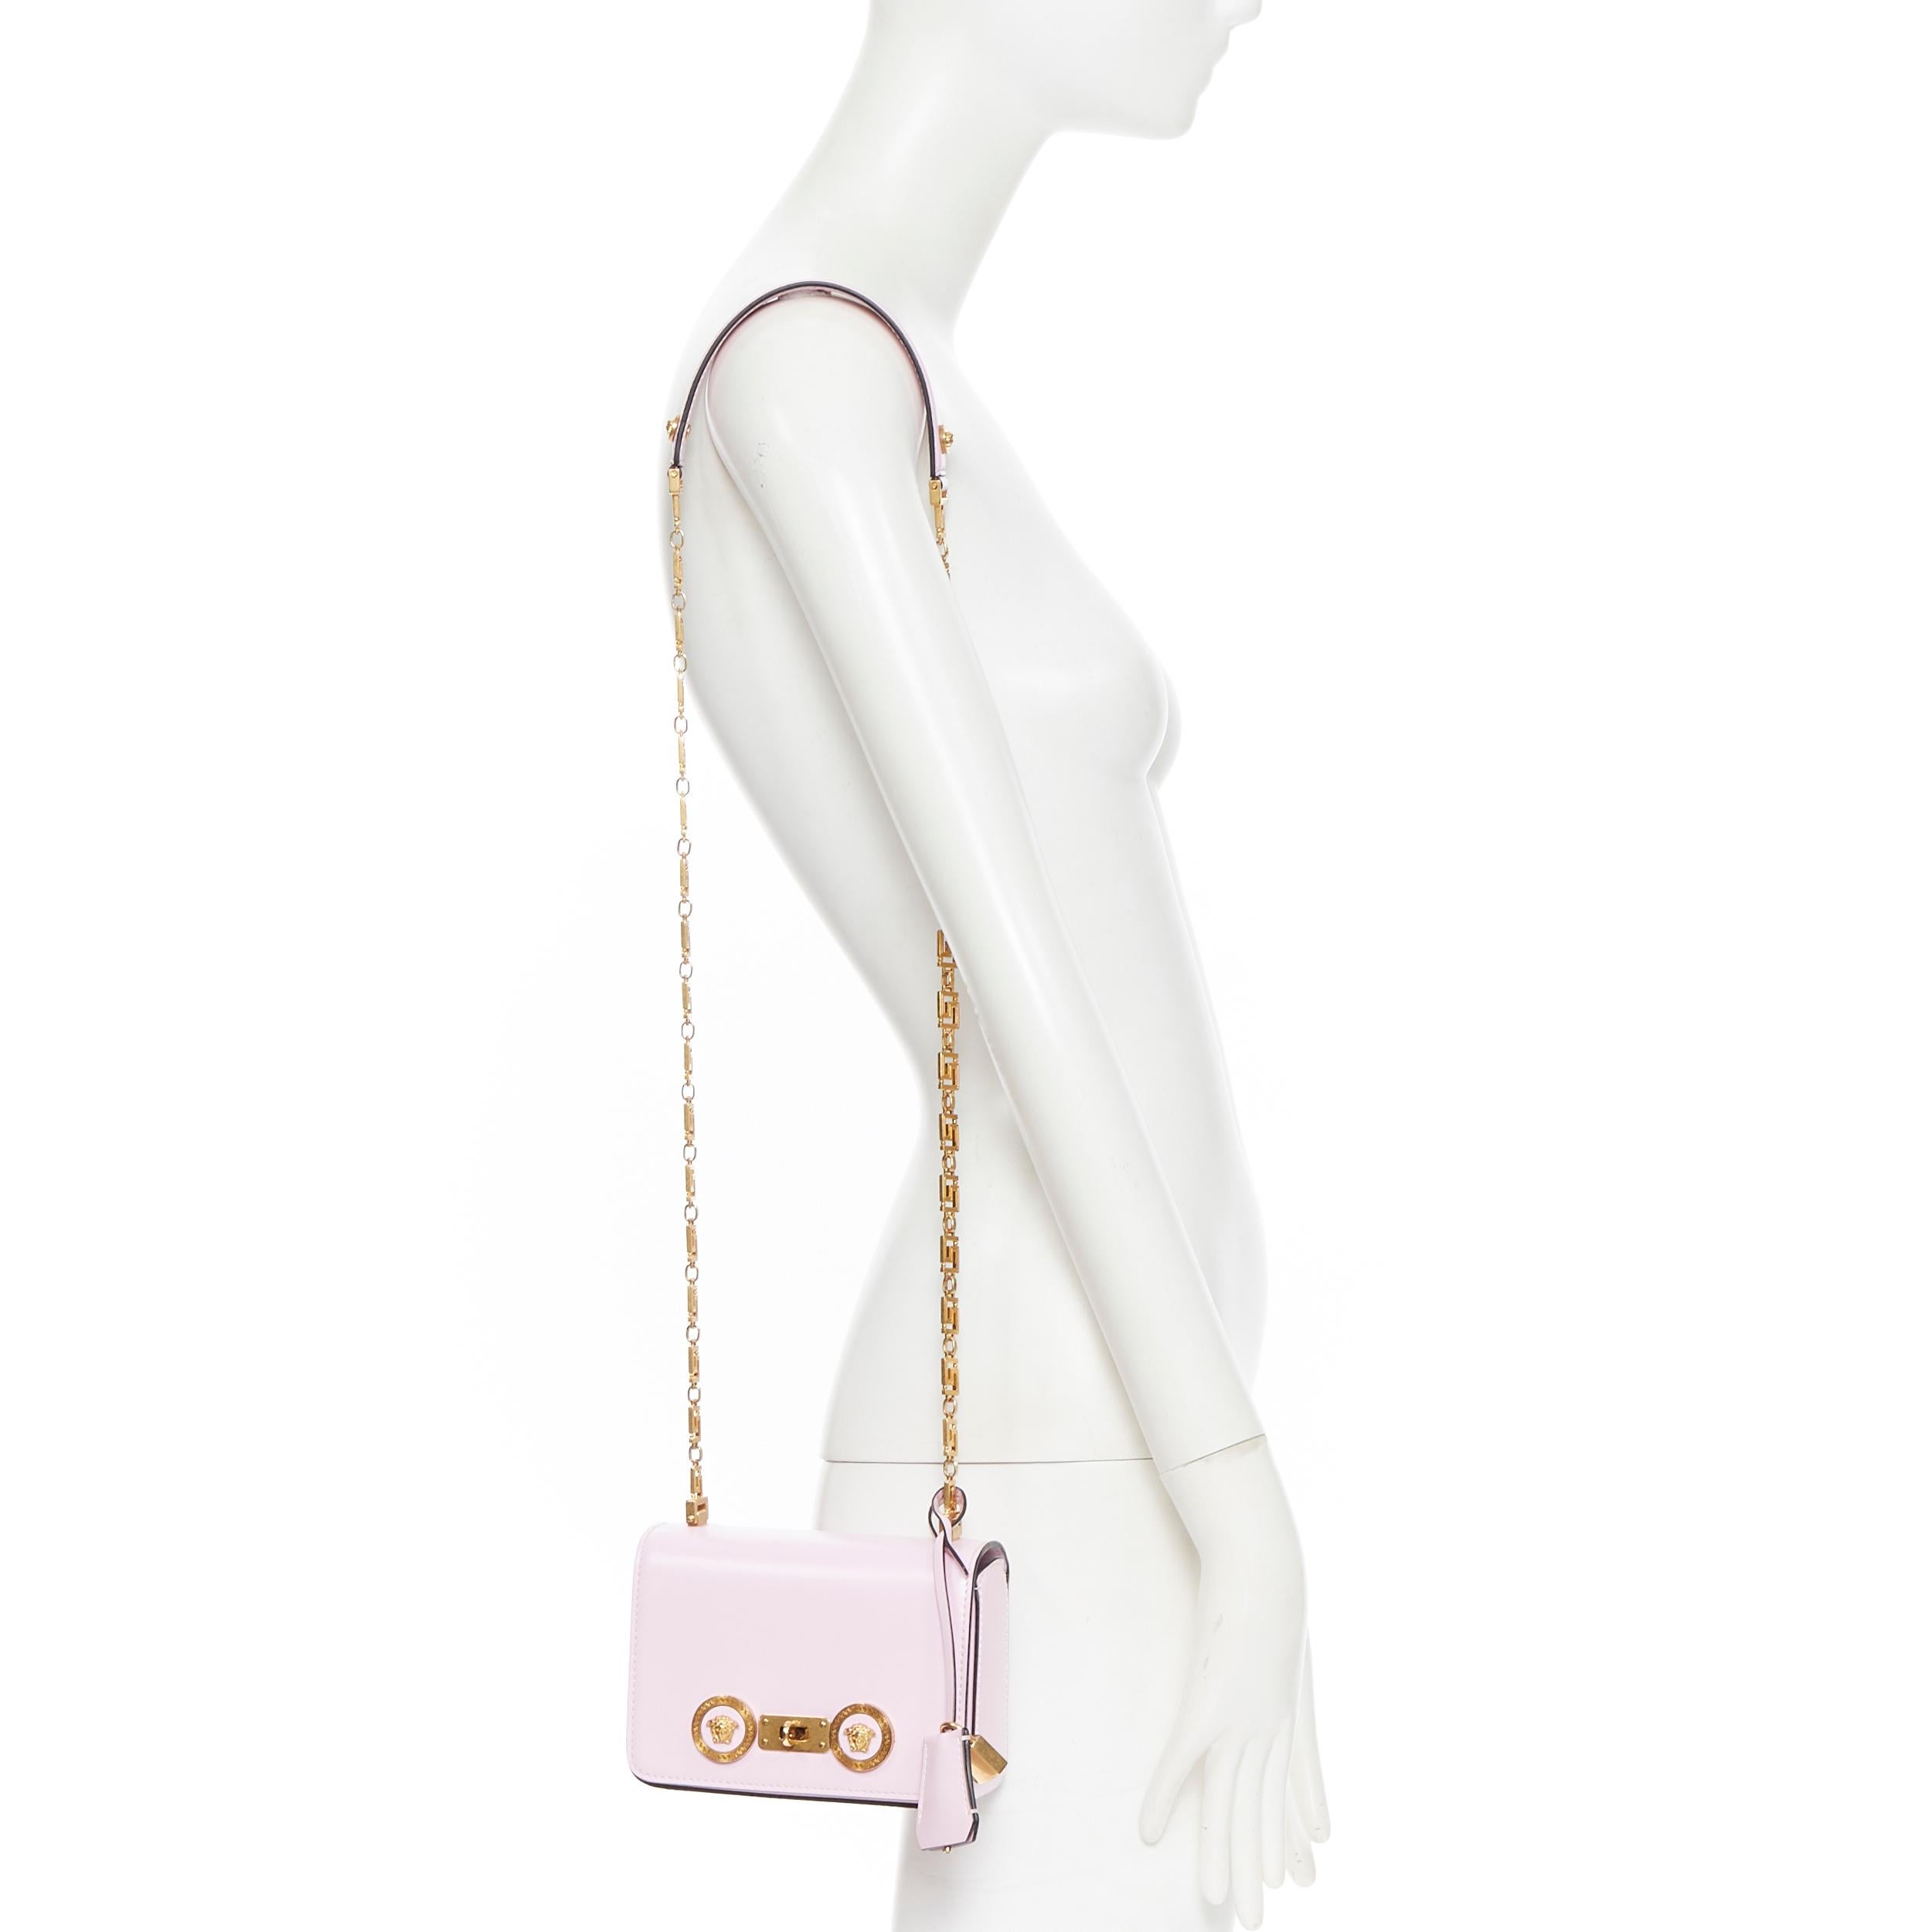 new VERSACE Mini Icon pink gold-tone Medusa turnlock Greca chain shoulder bag
Brand: Versace
Designer: Donatella Versace
Collection: 2019
Model Name / Style: Mini Icon
Material: Leather
Color: Pink
Pattern: Solid
Closure: Turnlock
Lining material: